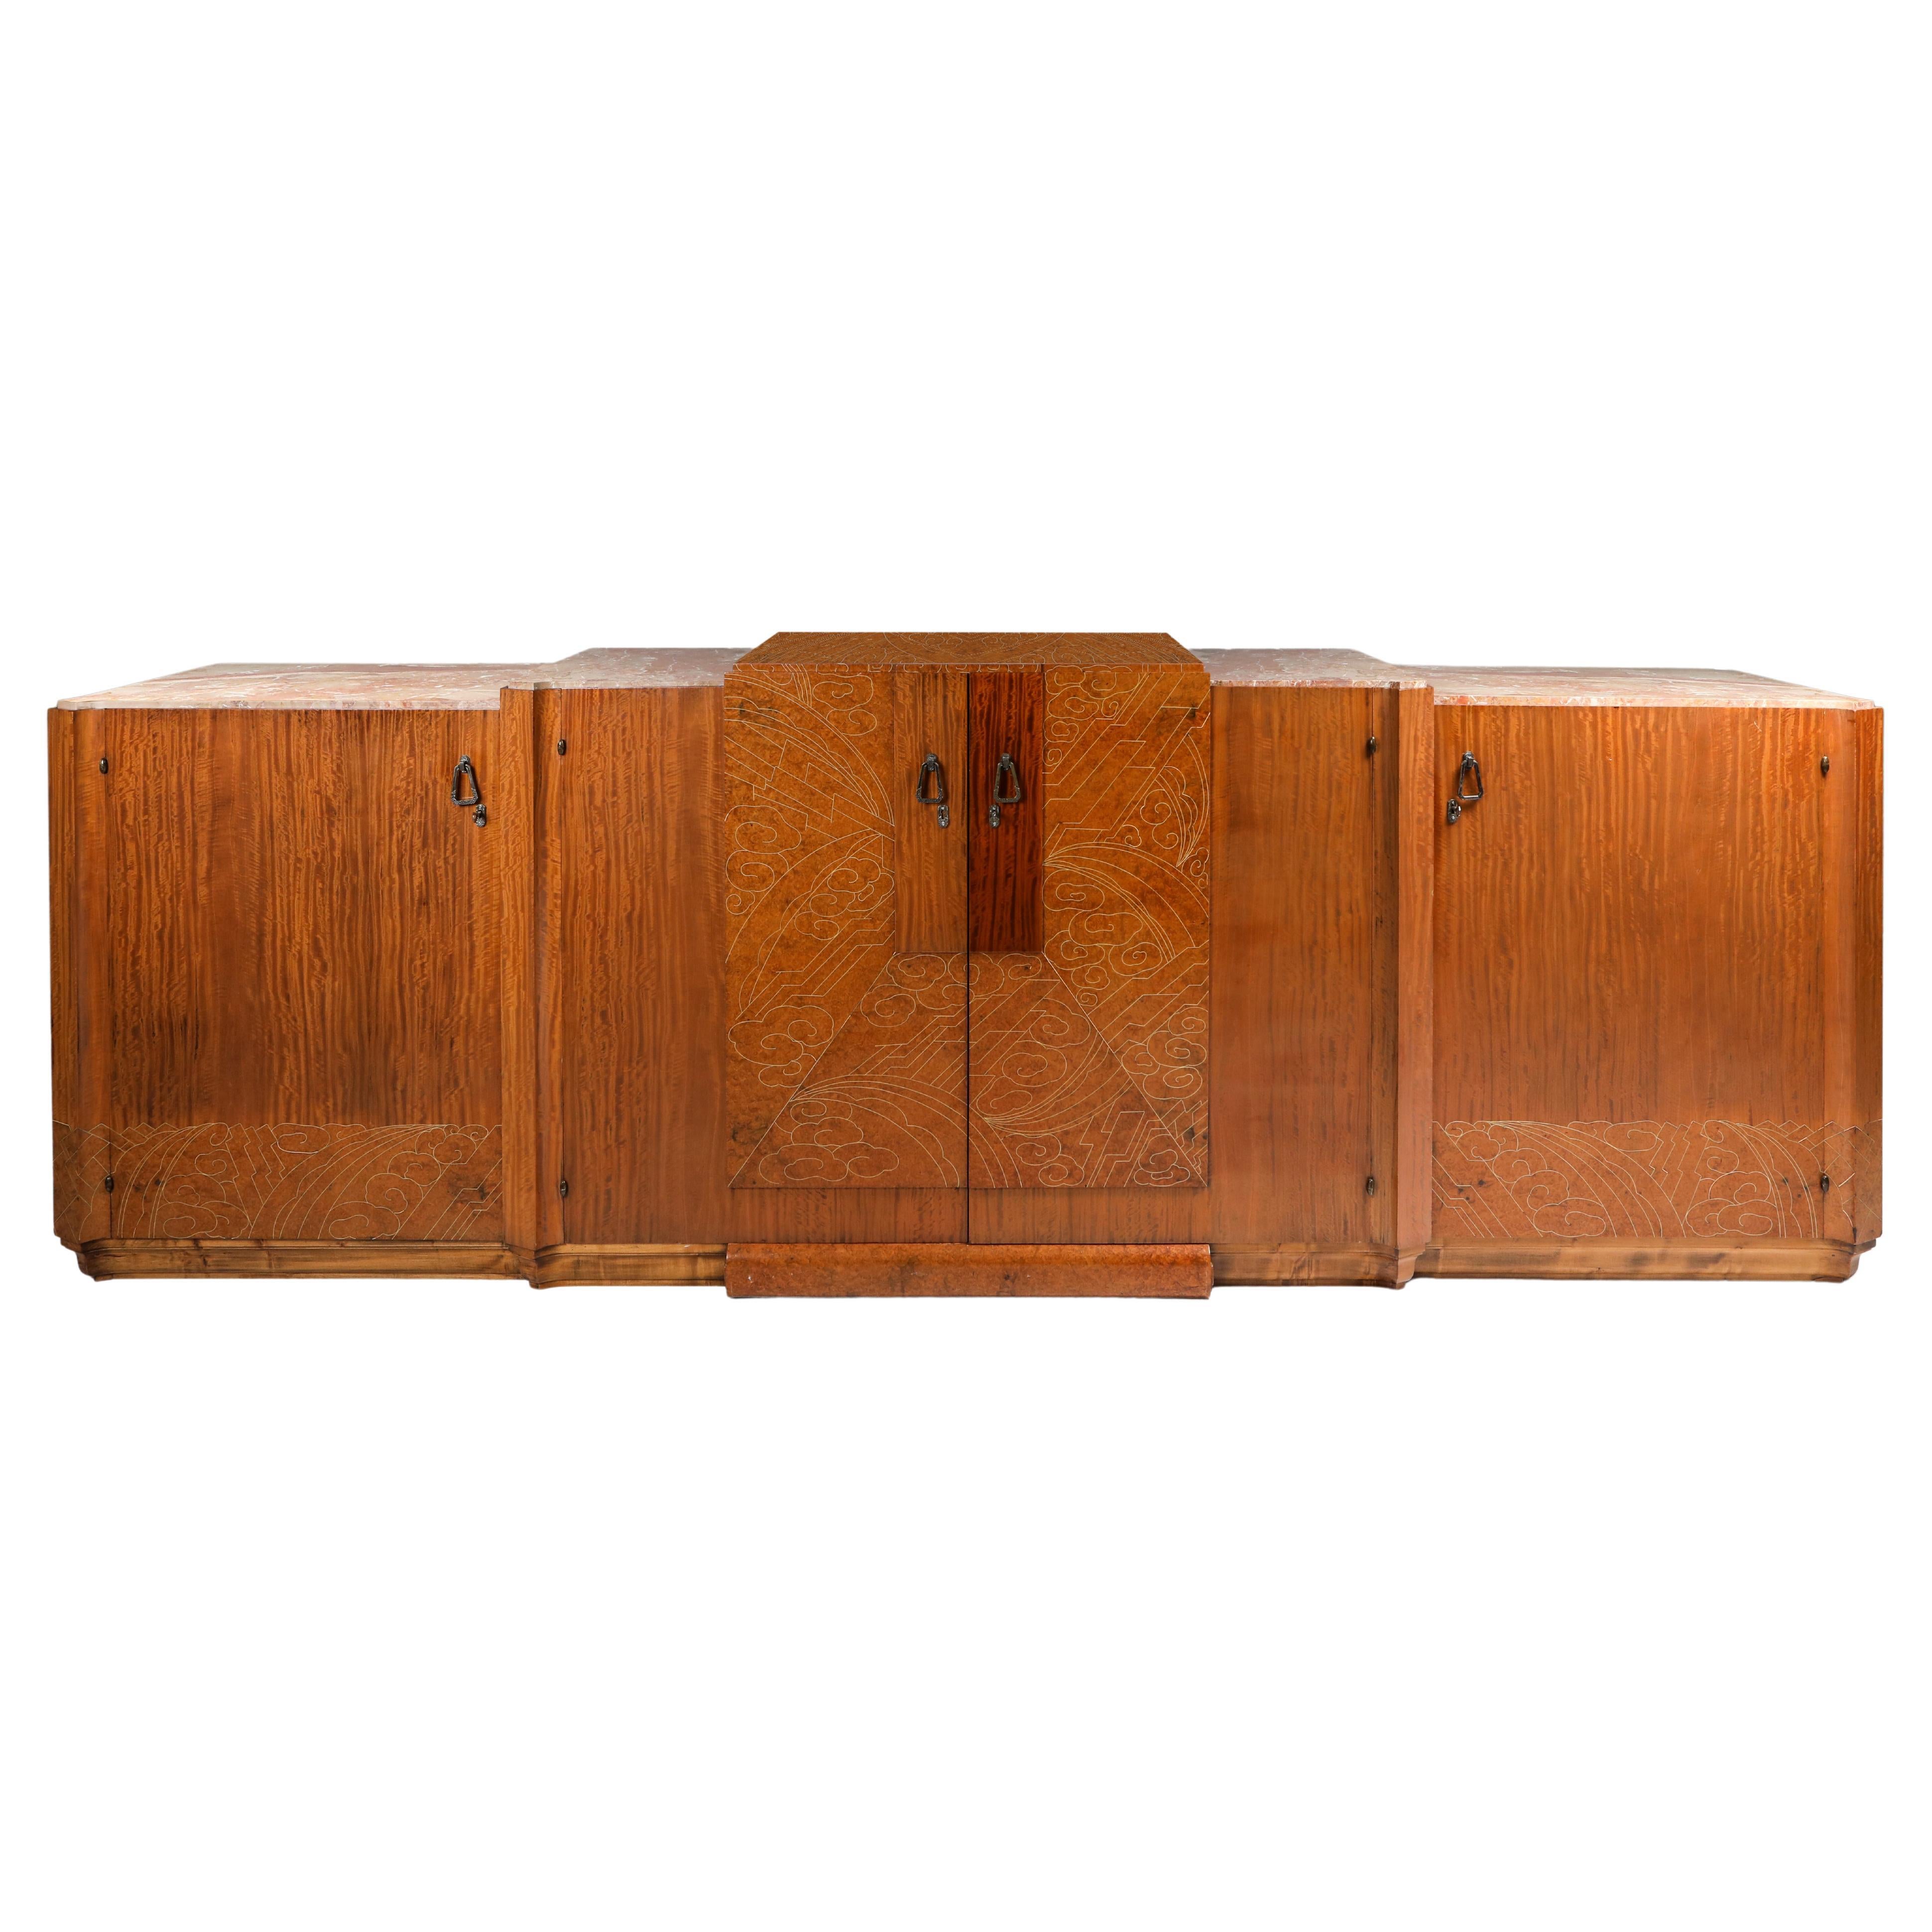 Art Deco High-End Credenza, Mahogany, Burl, Loupe D'amboine and Marble, 1930's For Sale